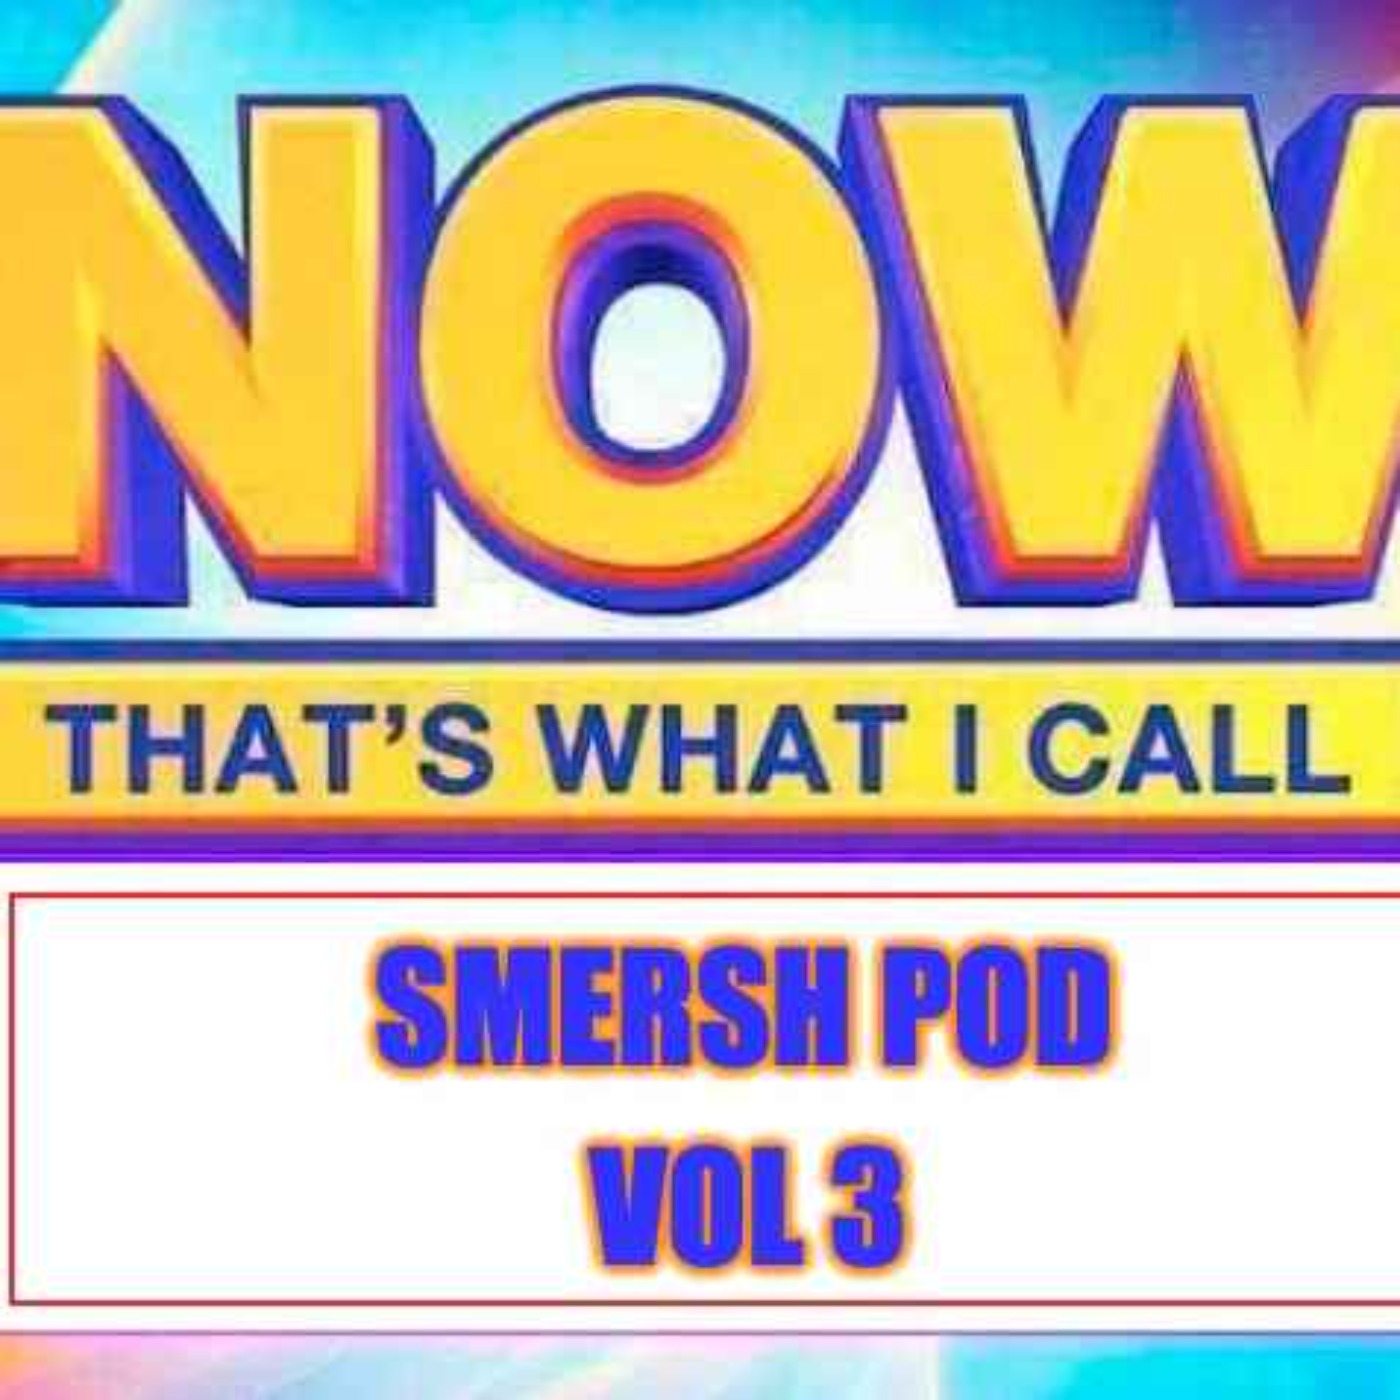 NOW THAT'S WHAT I CALL SMERSH POD: VOL: 3